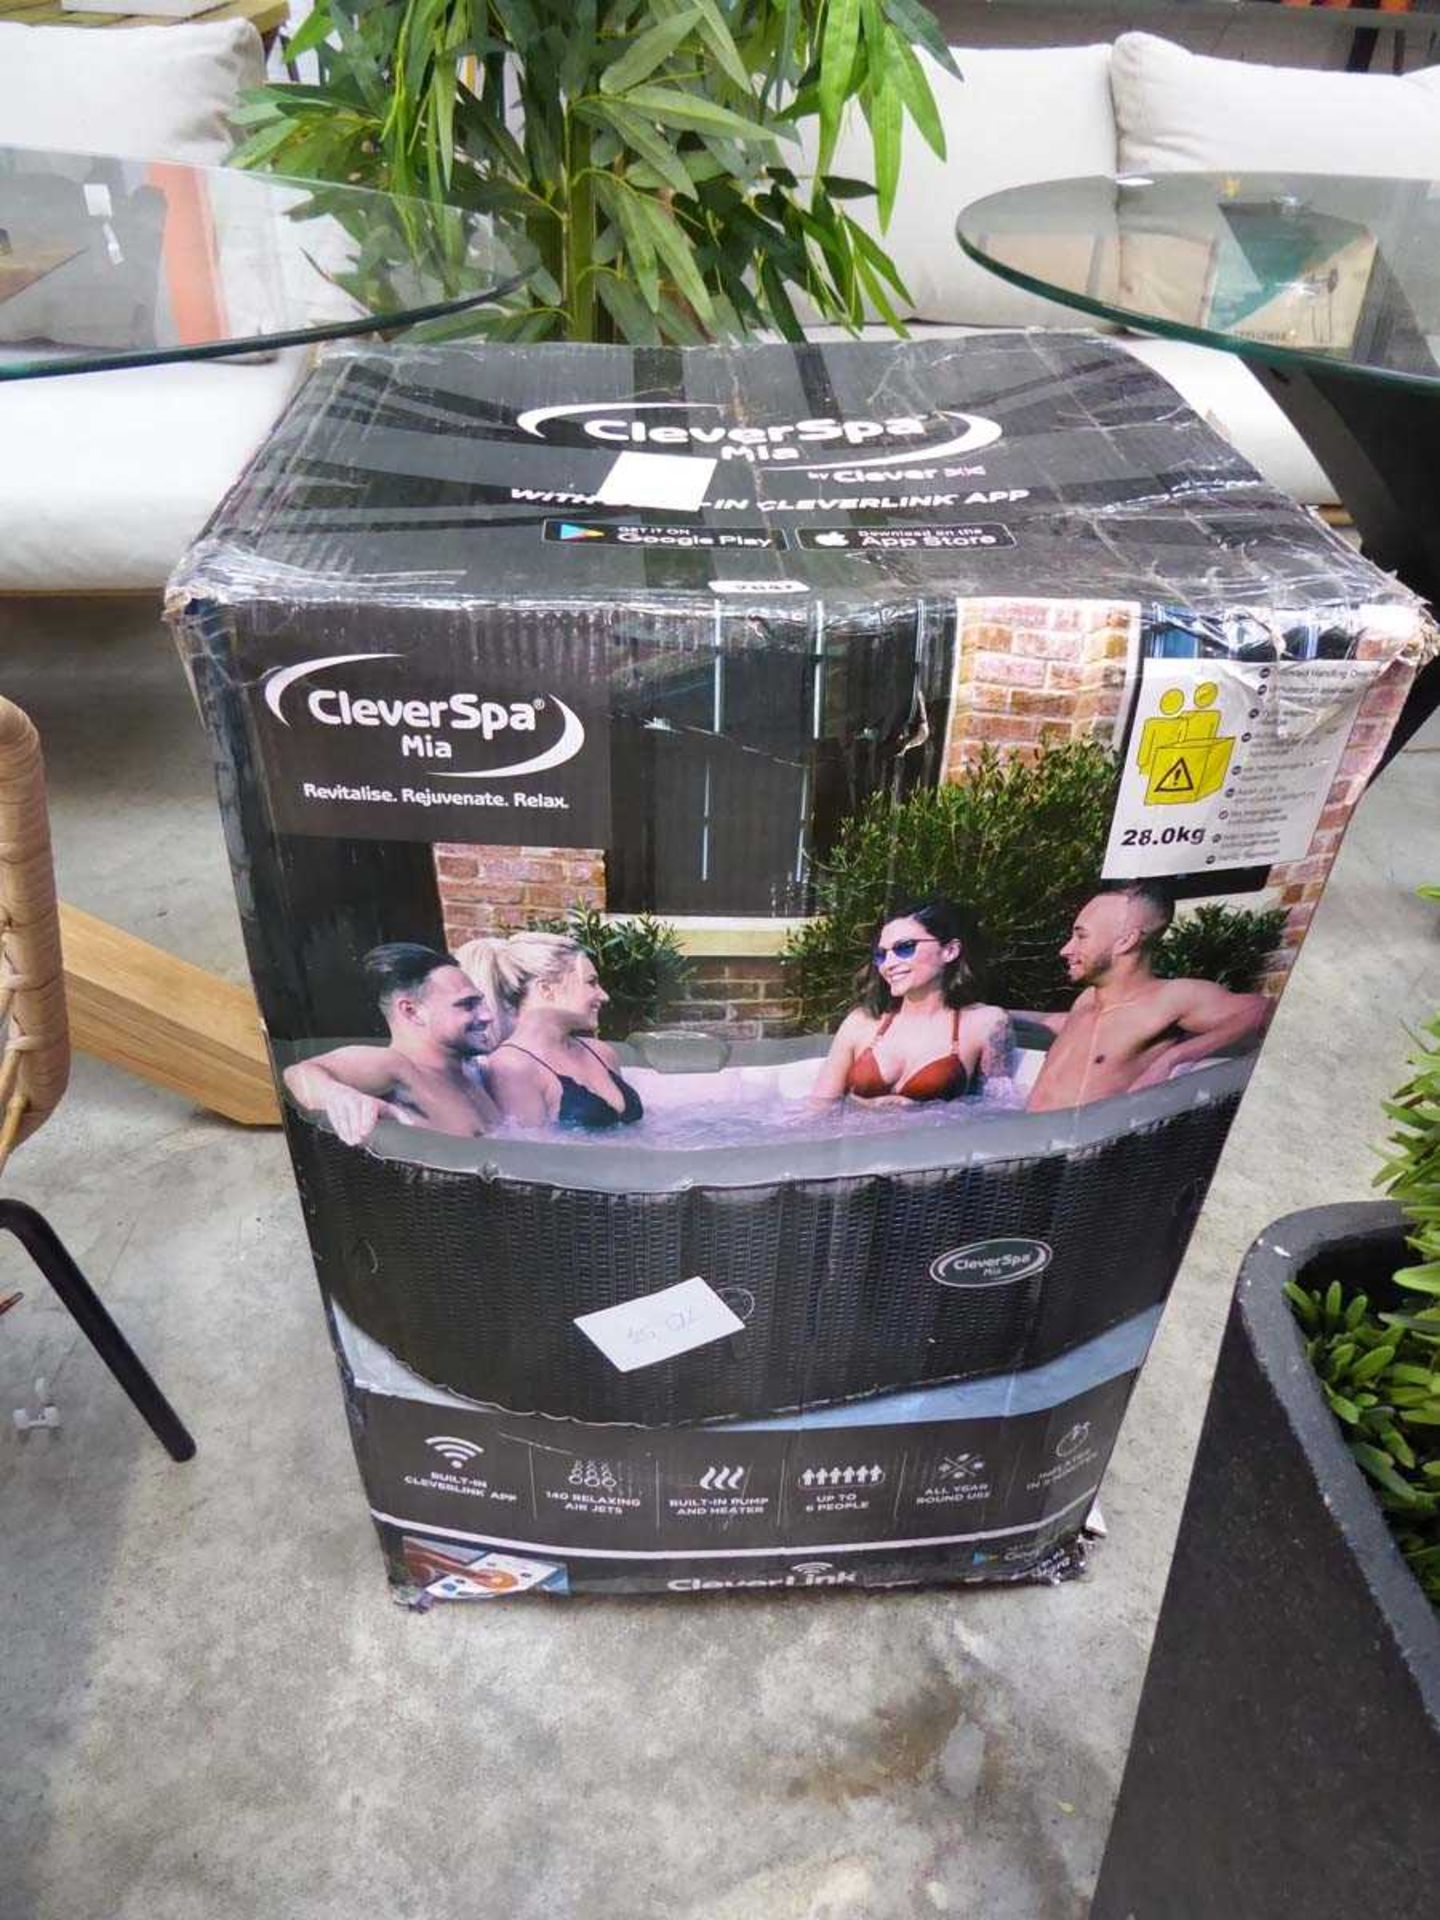 Boxed Mia inflatable Clever Spa